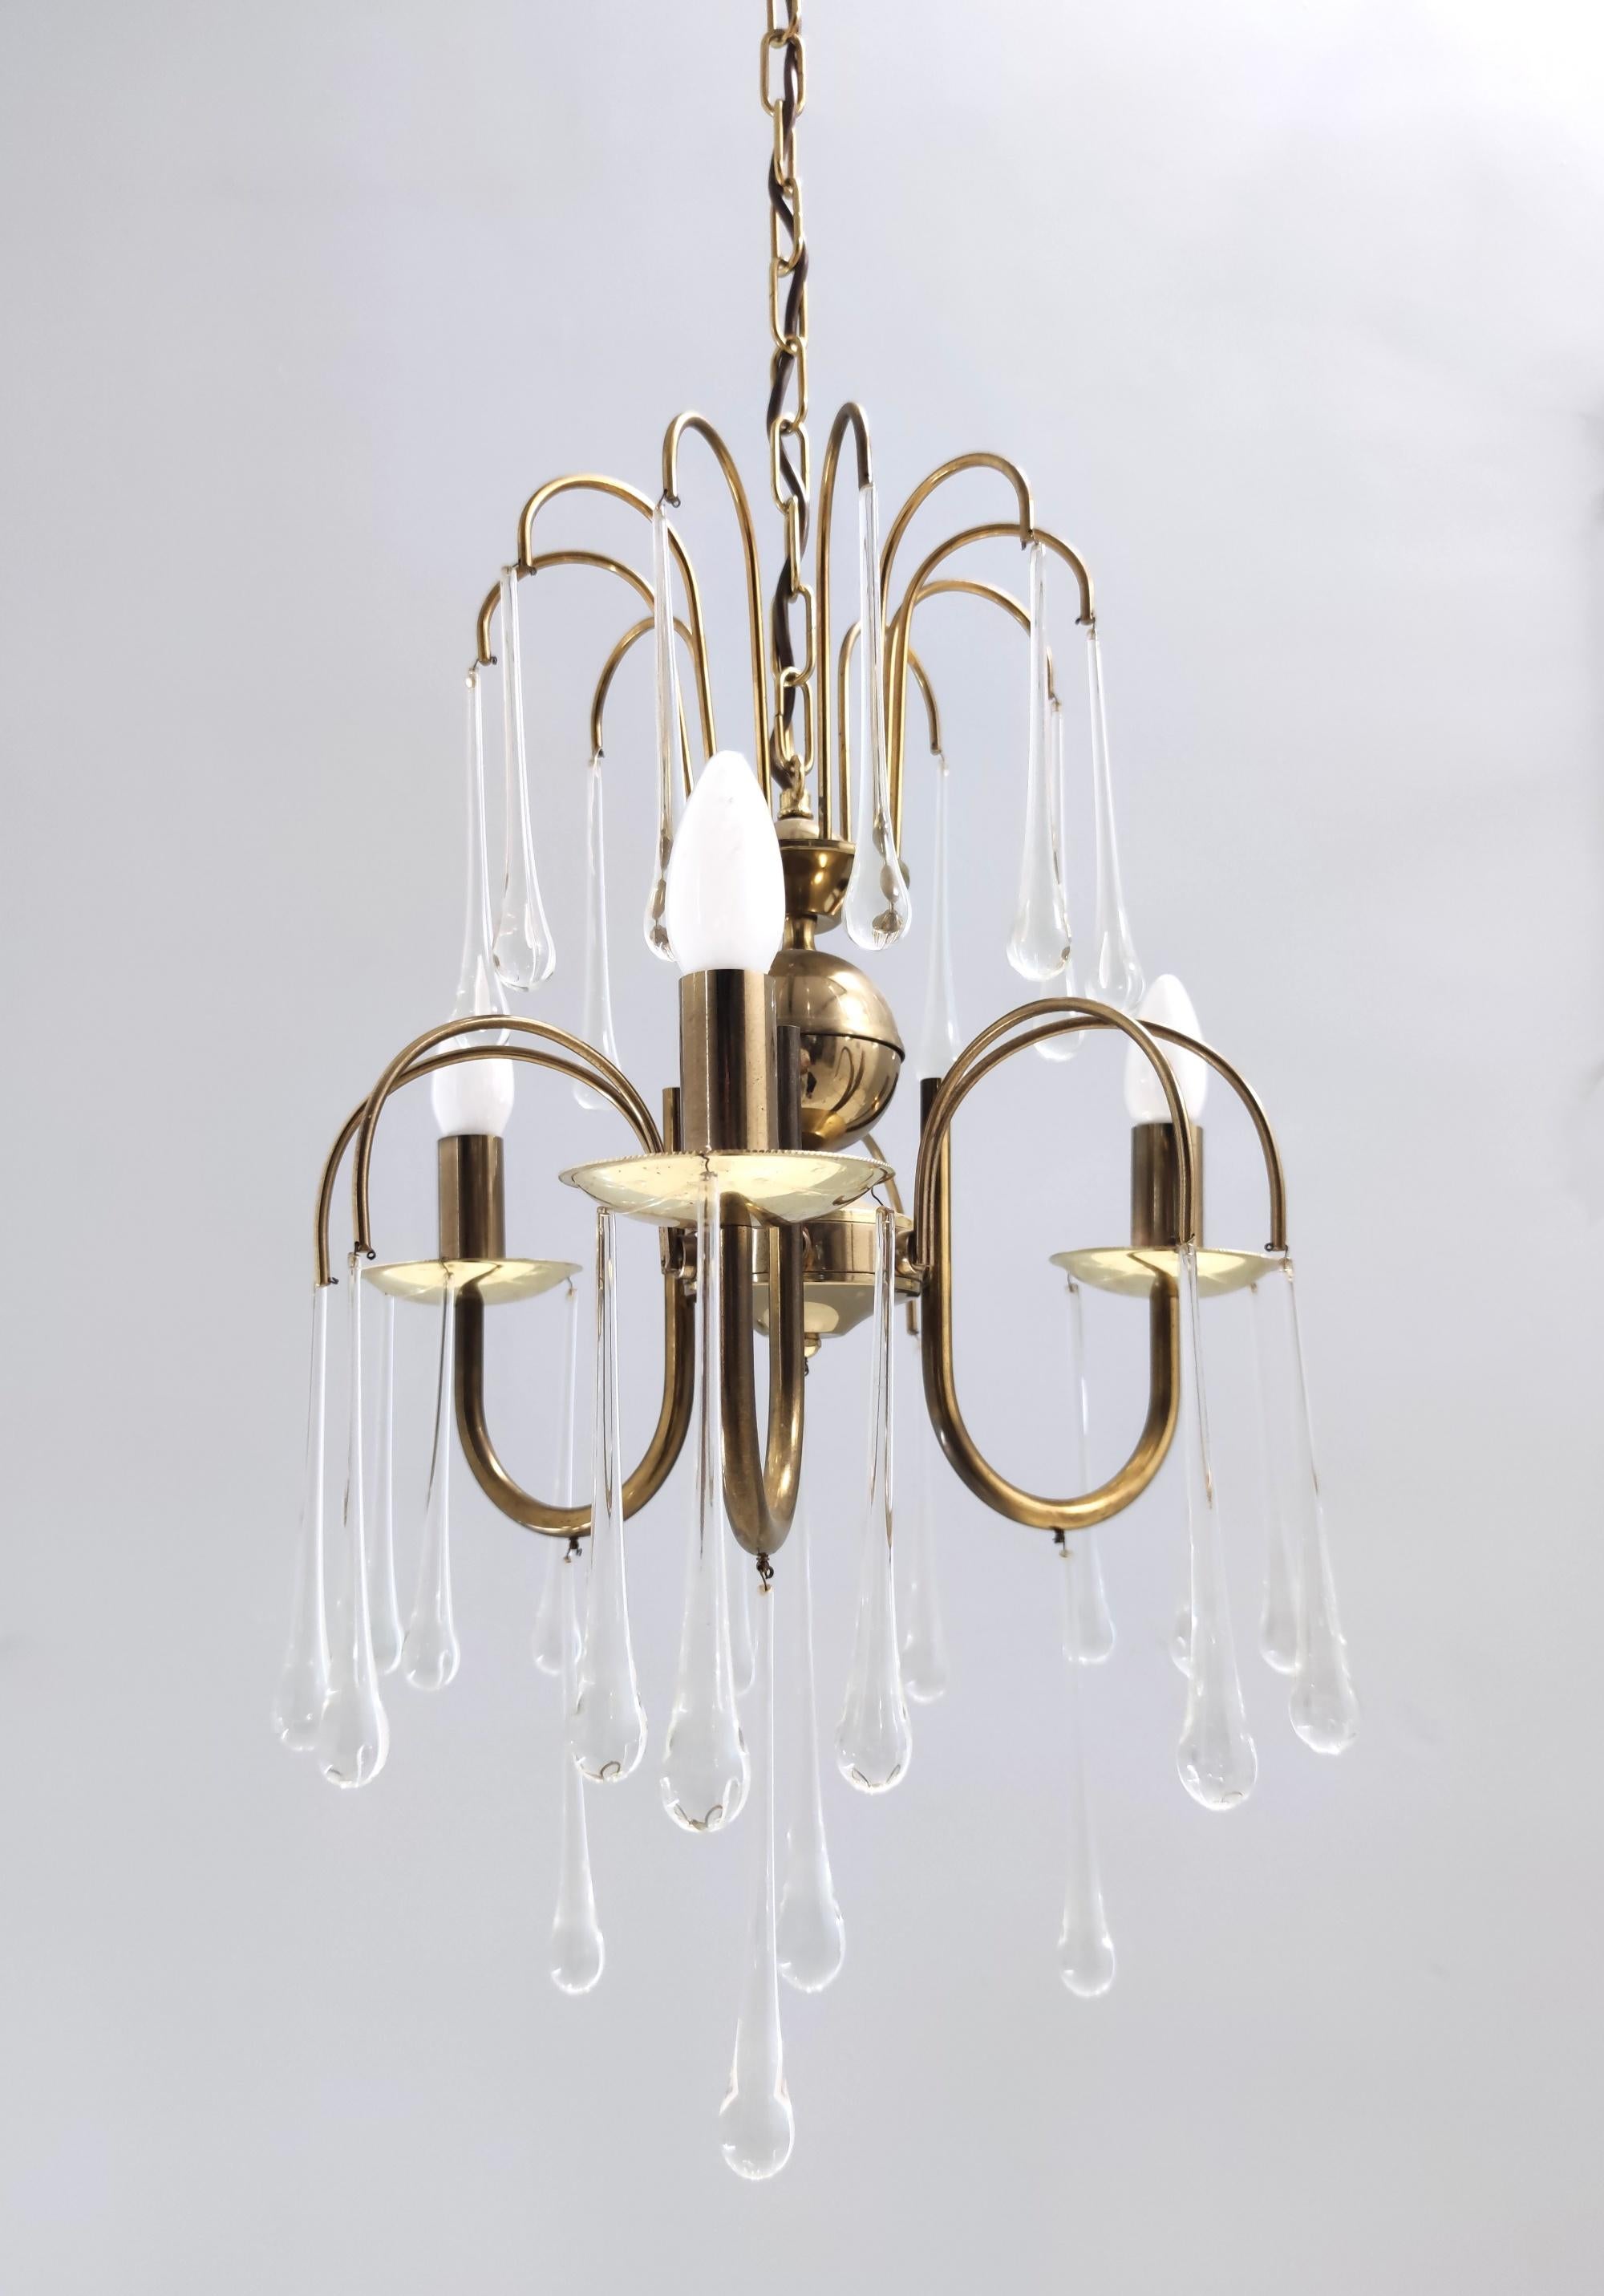 Late 20th Century Postmodern Murano Glass Teardrop Chandelier in the Style of Venini, Italy For Sale